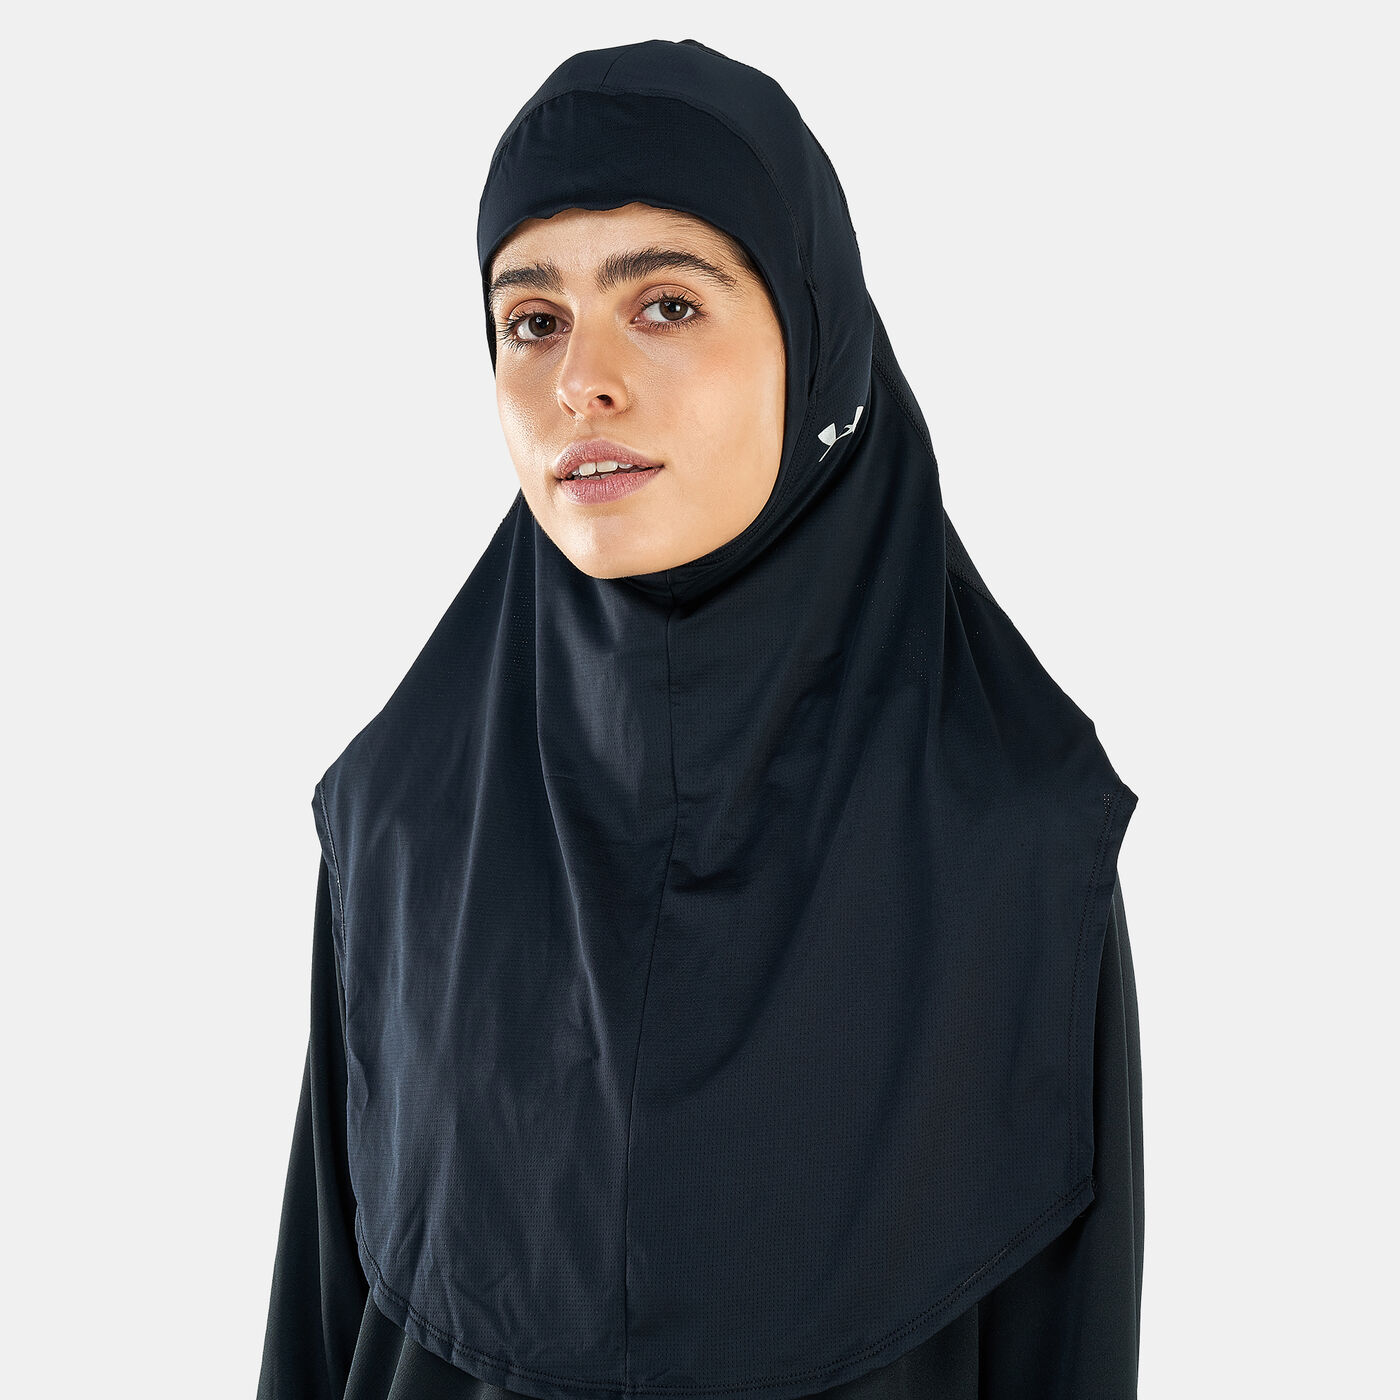 Women's Extended Sport Hijab